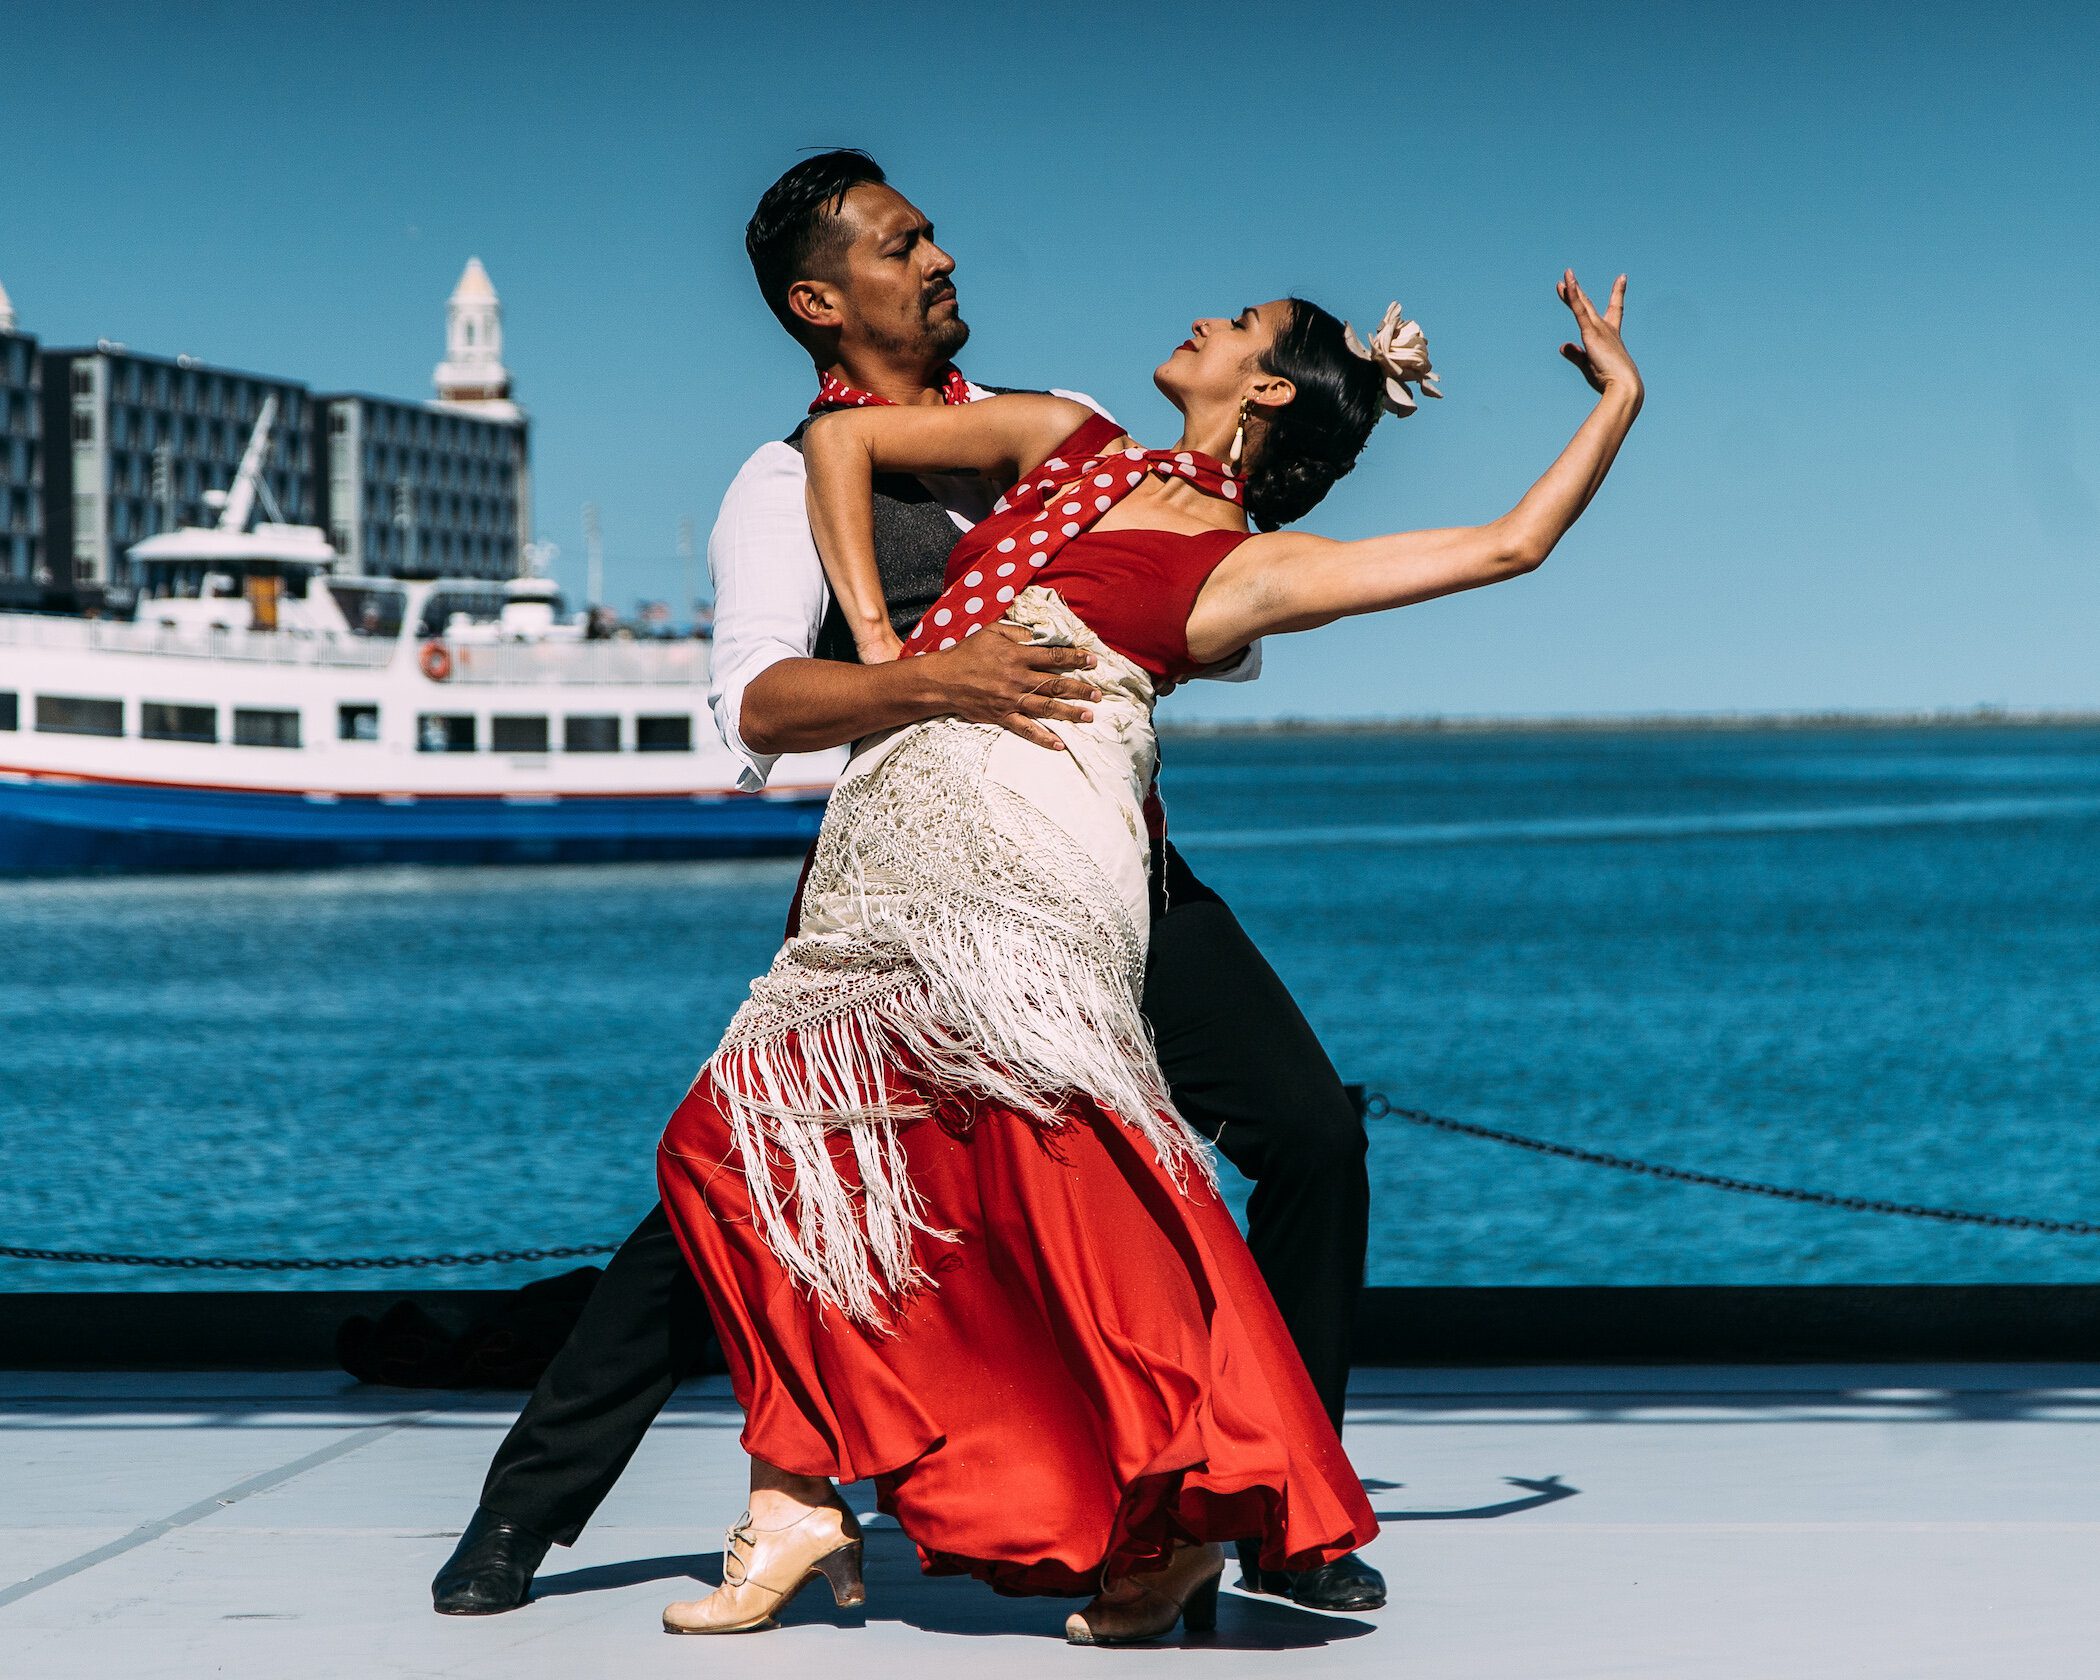 A Couple Performing at Pier Dance at Navy Pier